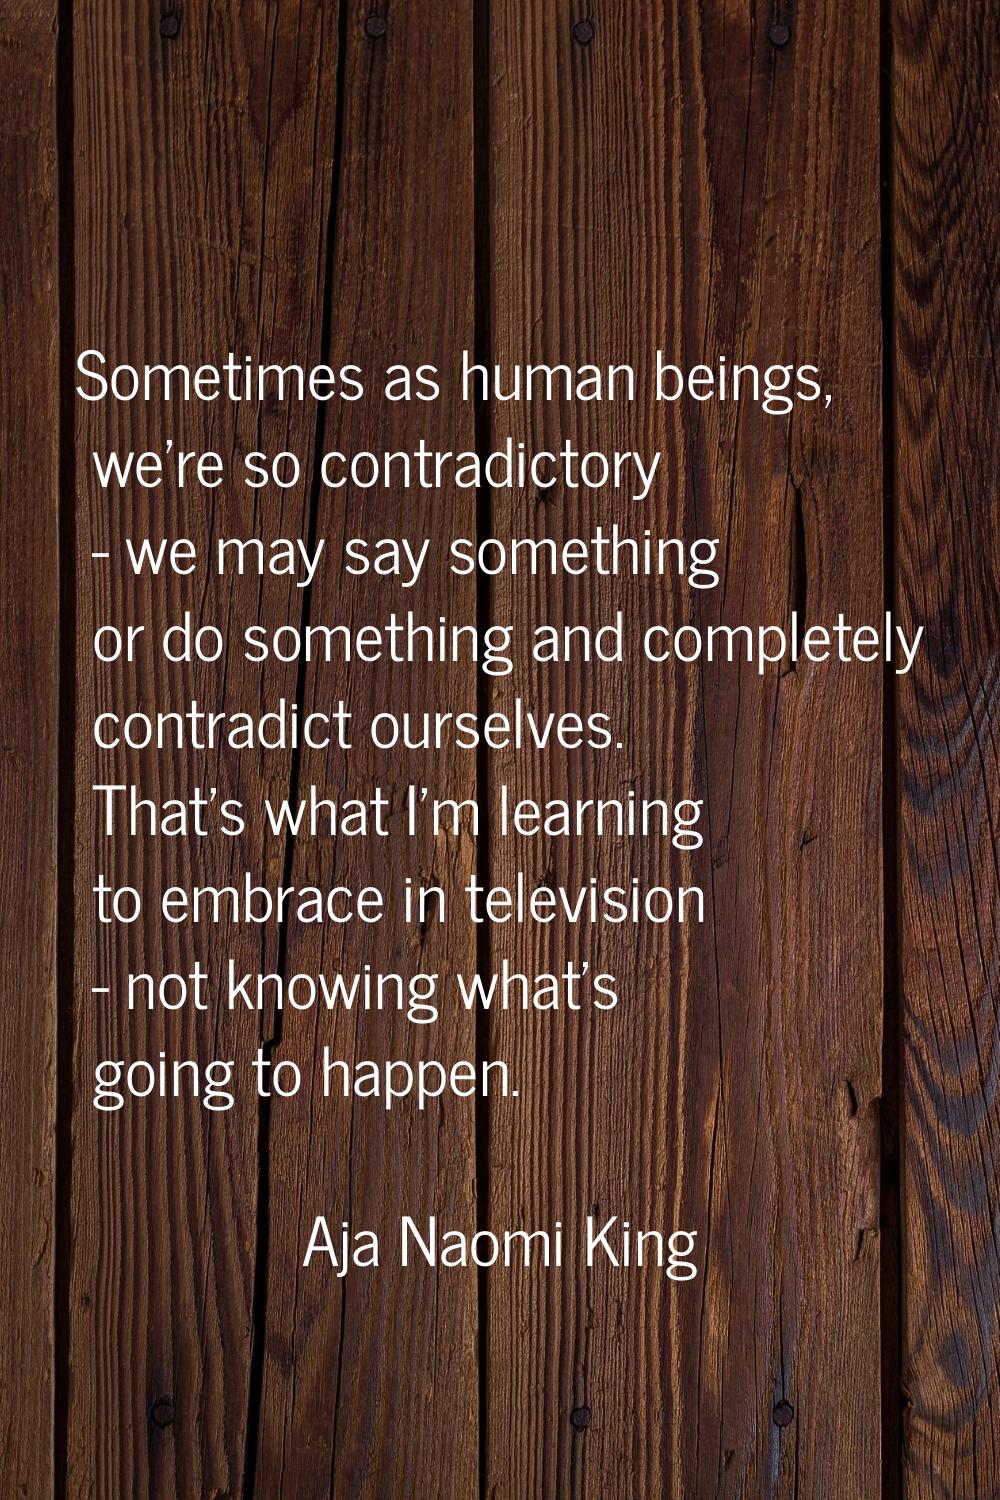 Sometimes as human beings, we're so contradictory - we may say something or do something and comple